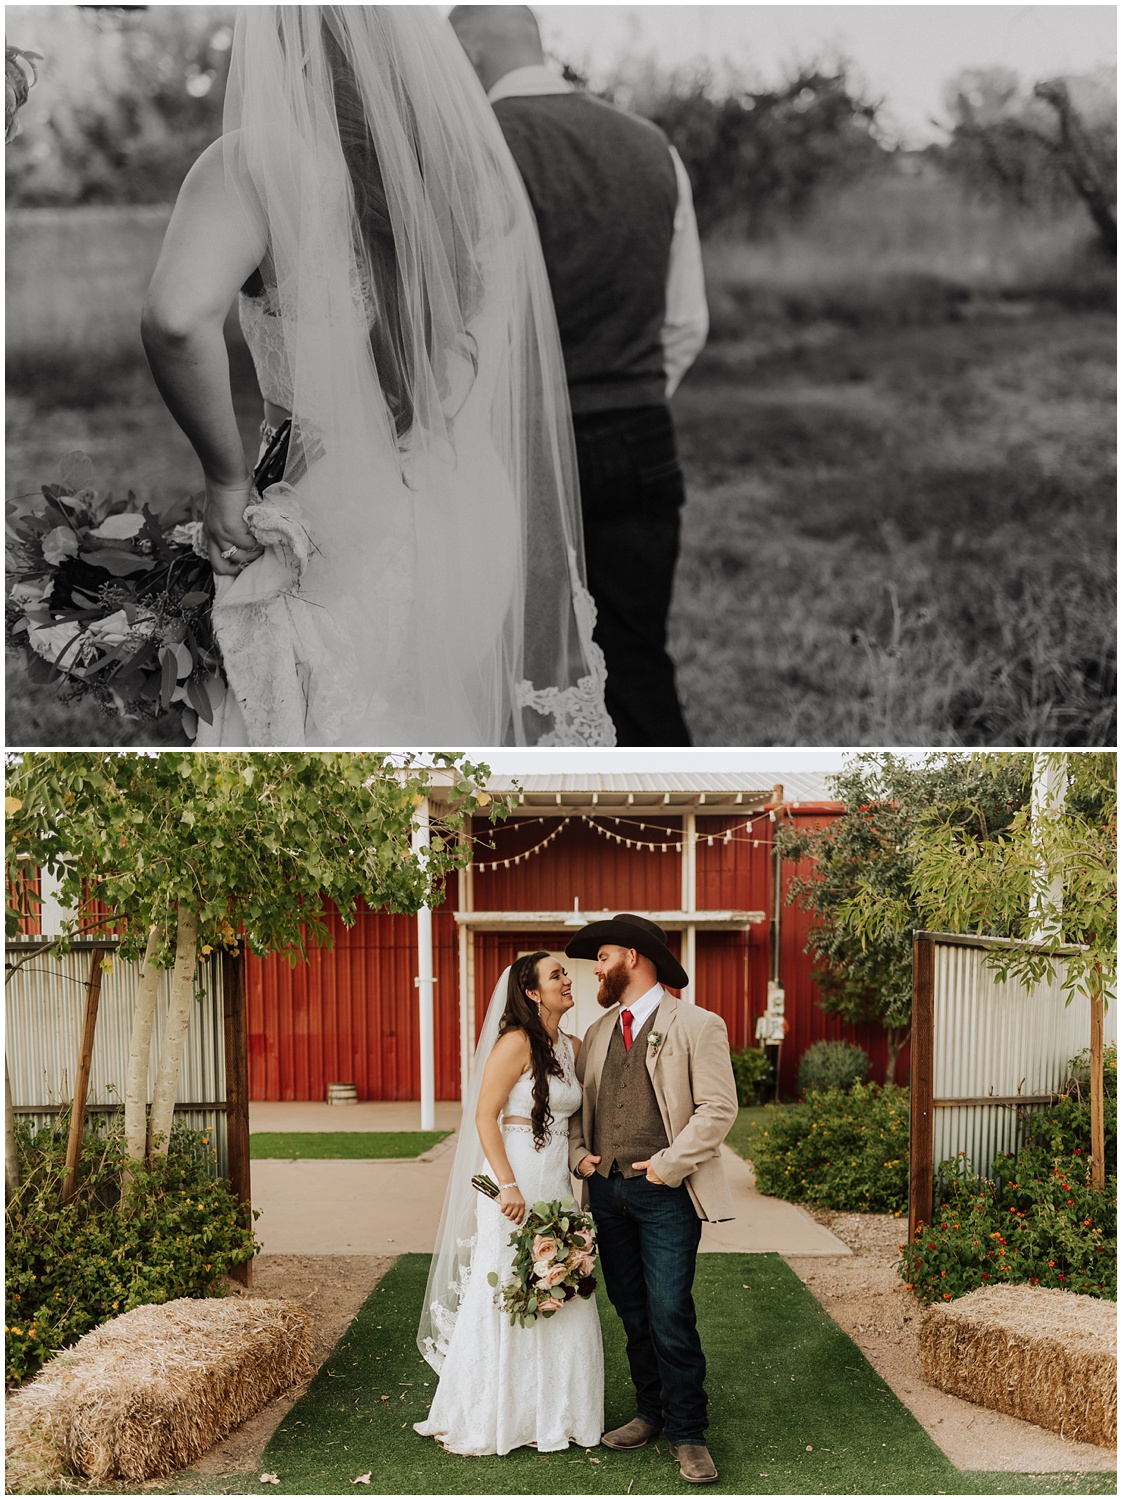 Photojournalism style wedding documented at Schnepf Farms in Queen Creek, Arizona.